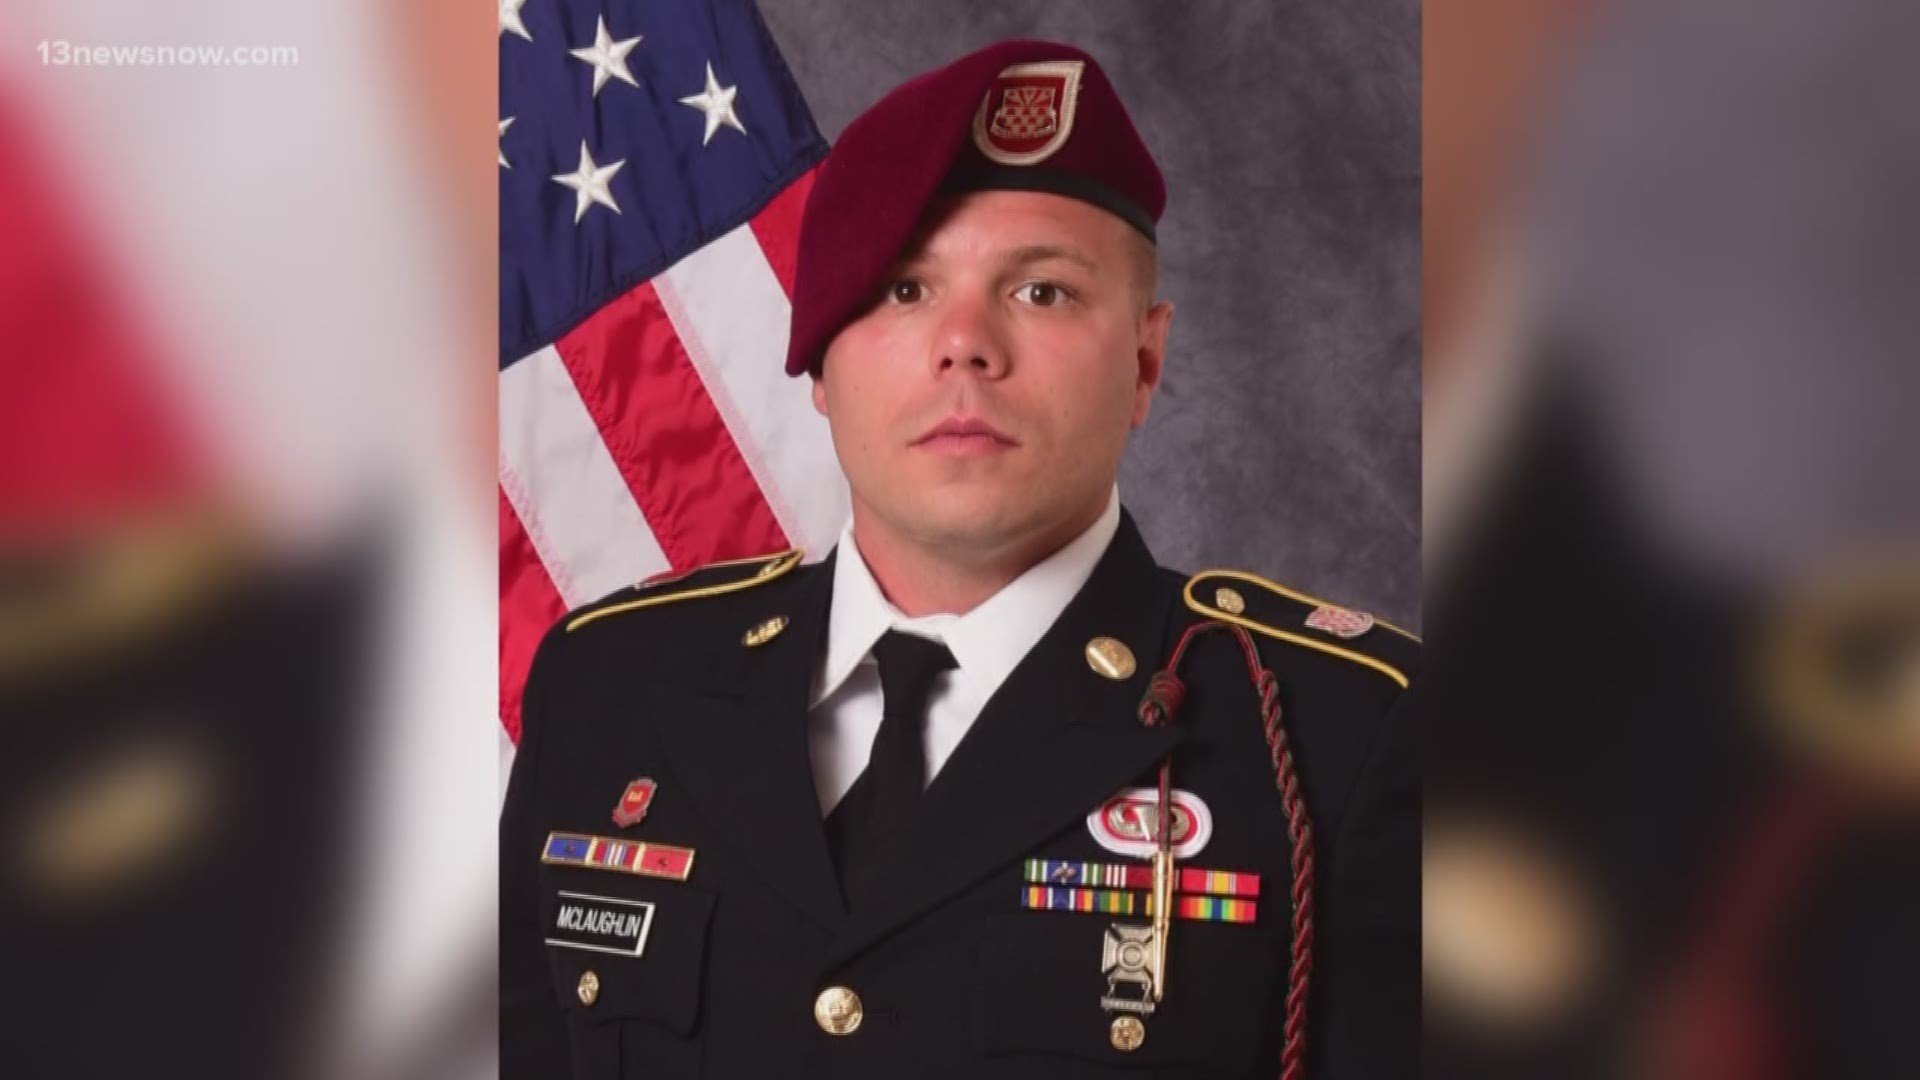 Staff Sgt. Ian P. McLaughlin, 29, of Newport News, Virginia, was one of two soldiers killed by a roadside bomb in Afghanistan on Saturday.